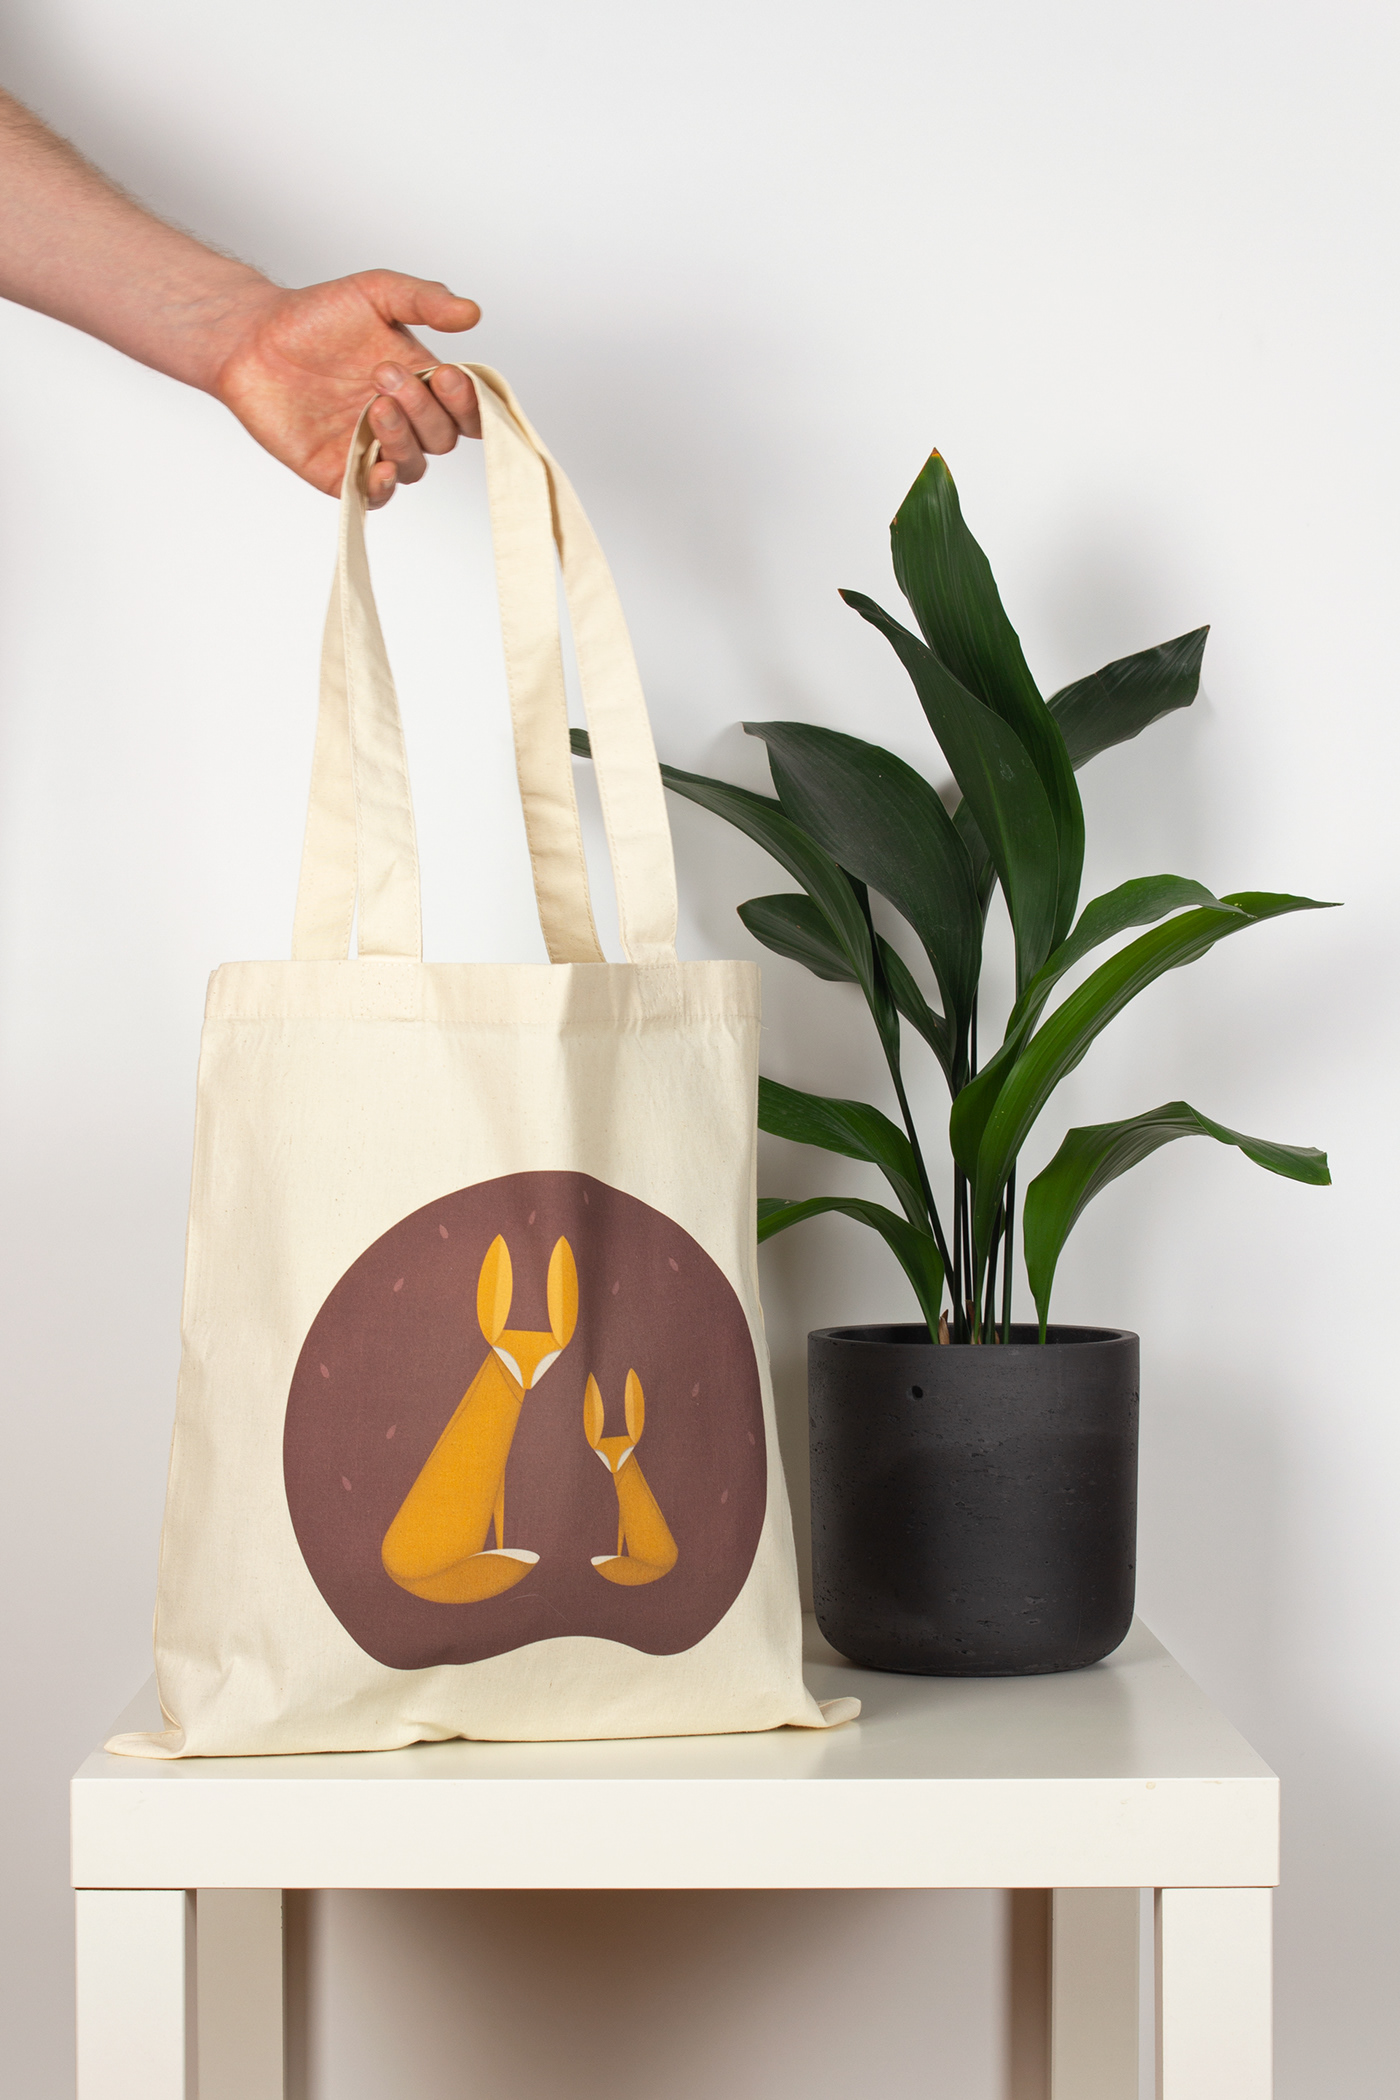 Foxes illustration printed on natural cotton bag.